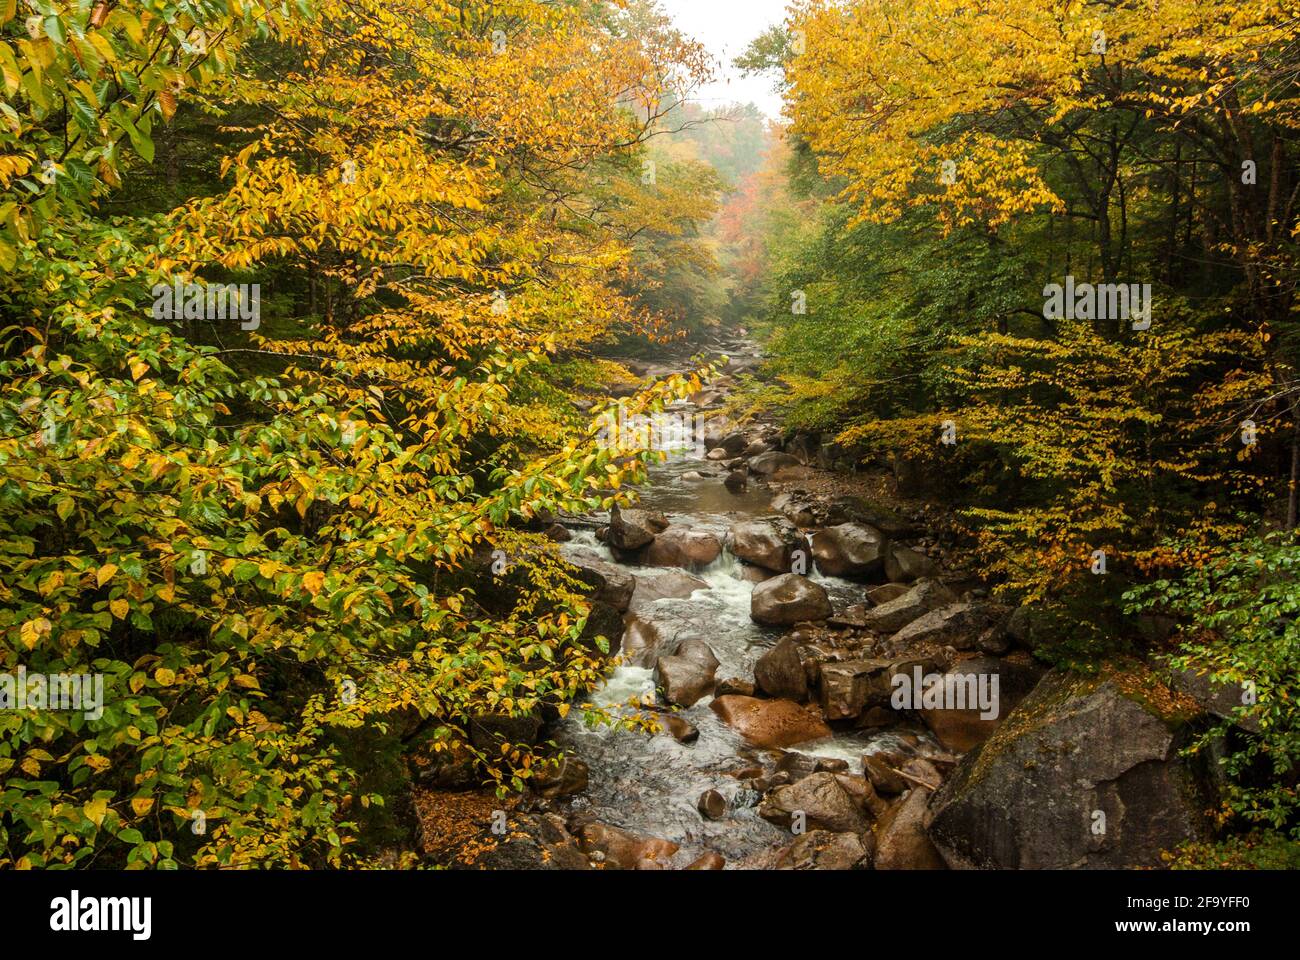 The  Pemigewasset River in Franconia Notch State Park, New Hampshire, USA on a rainy day in autumn / fall. Stock Photo